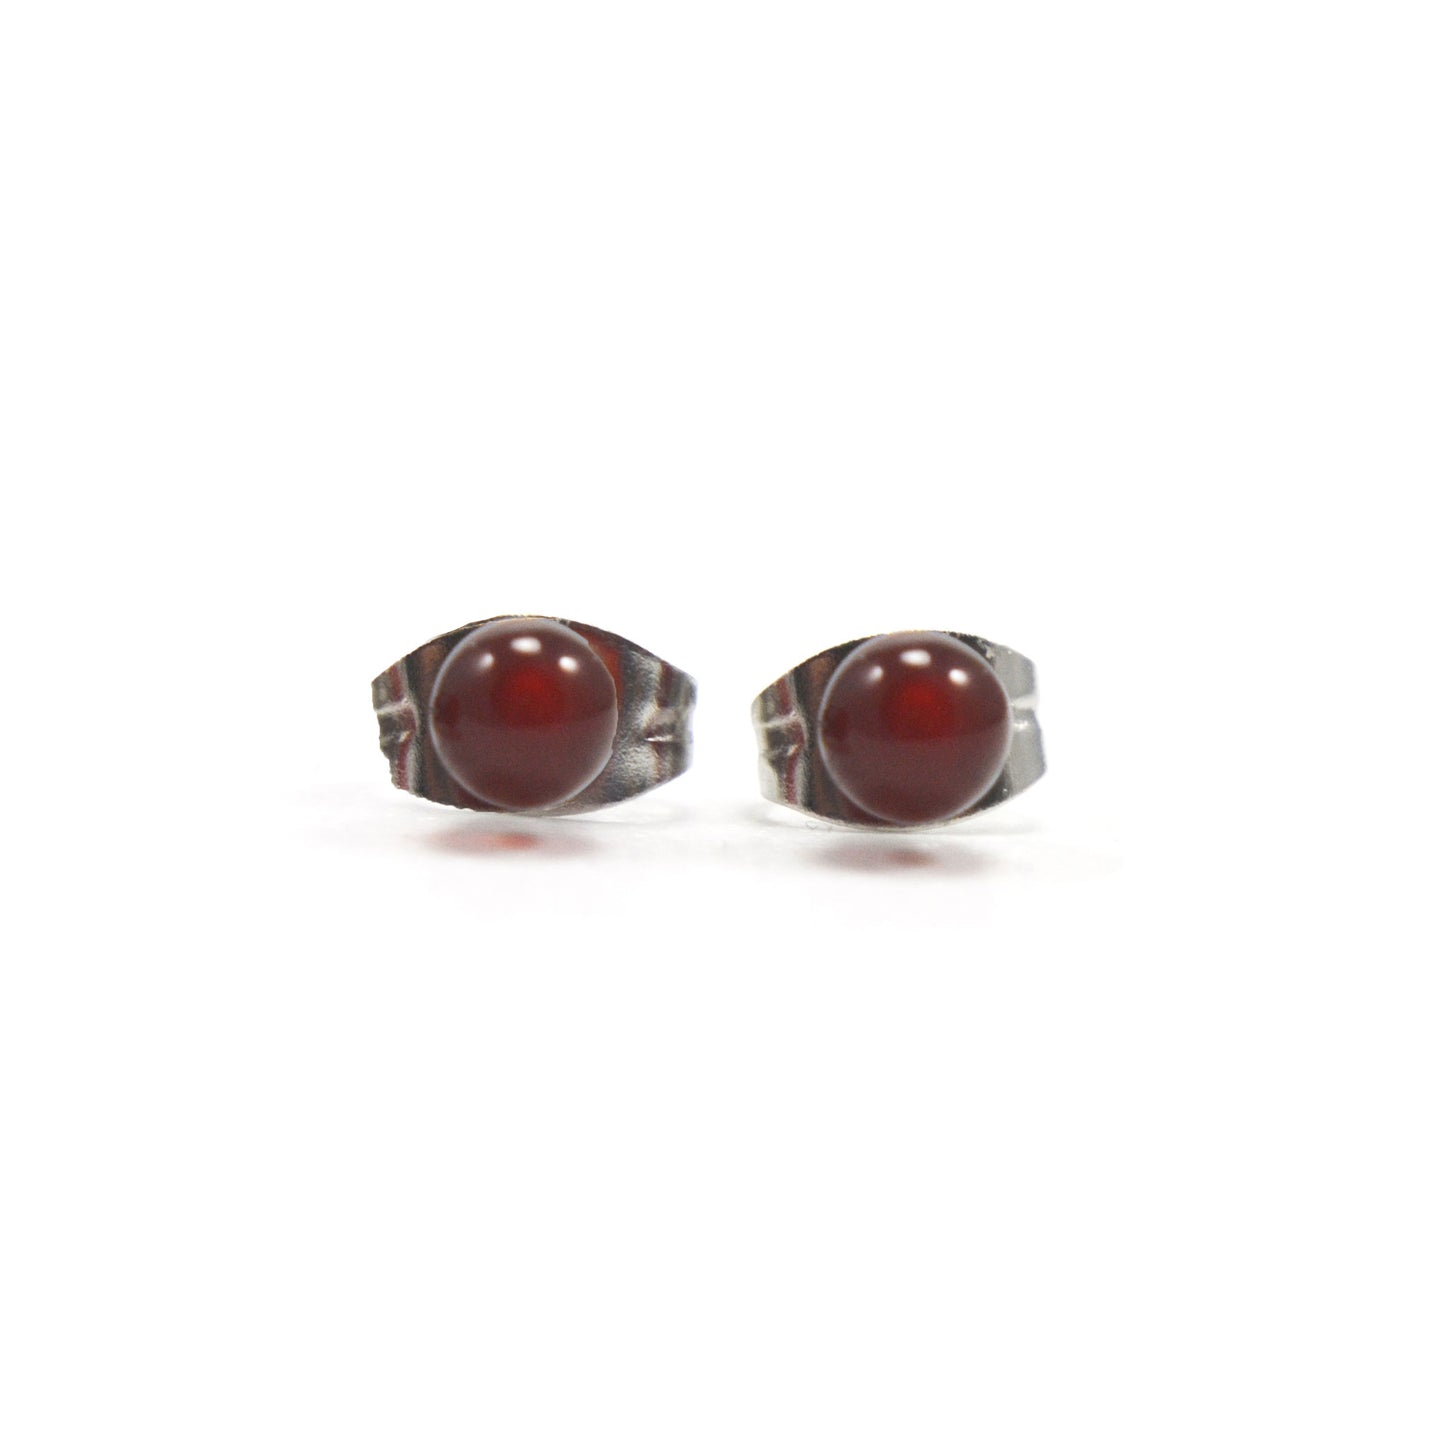 Front view of small orange Carnelian studs on white background